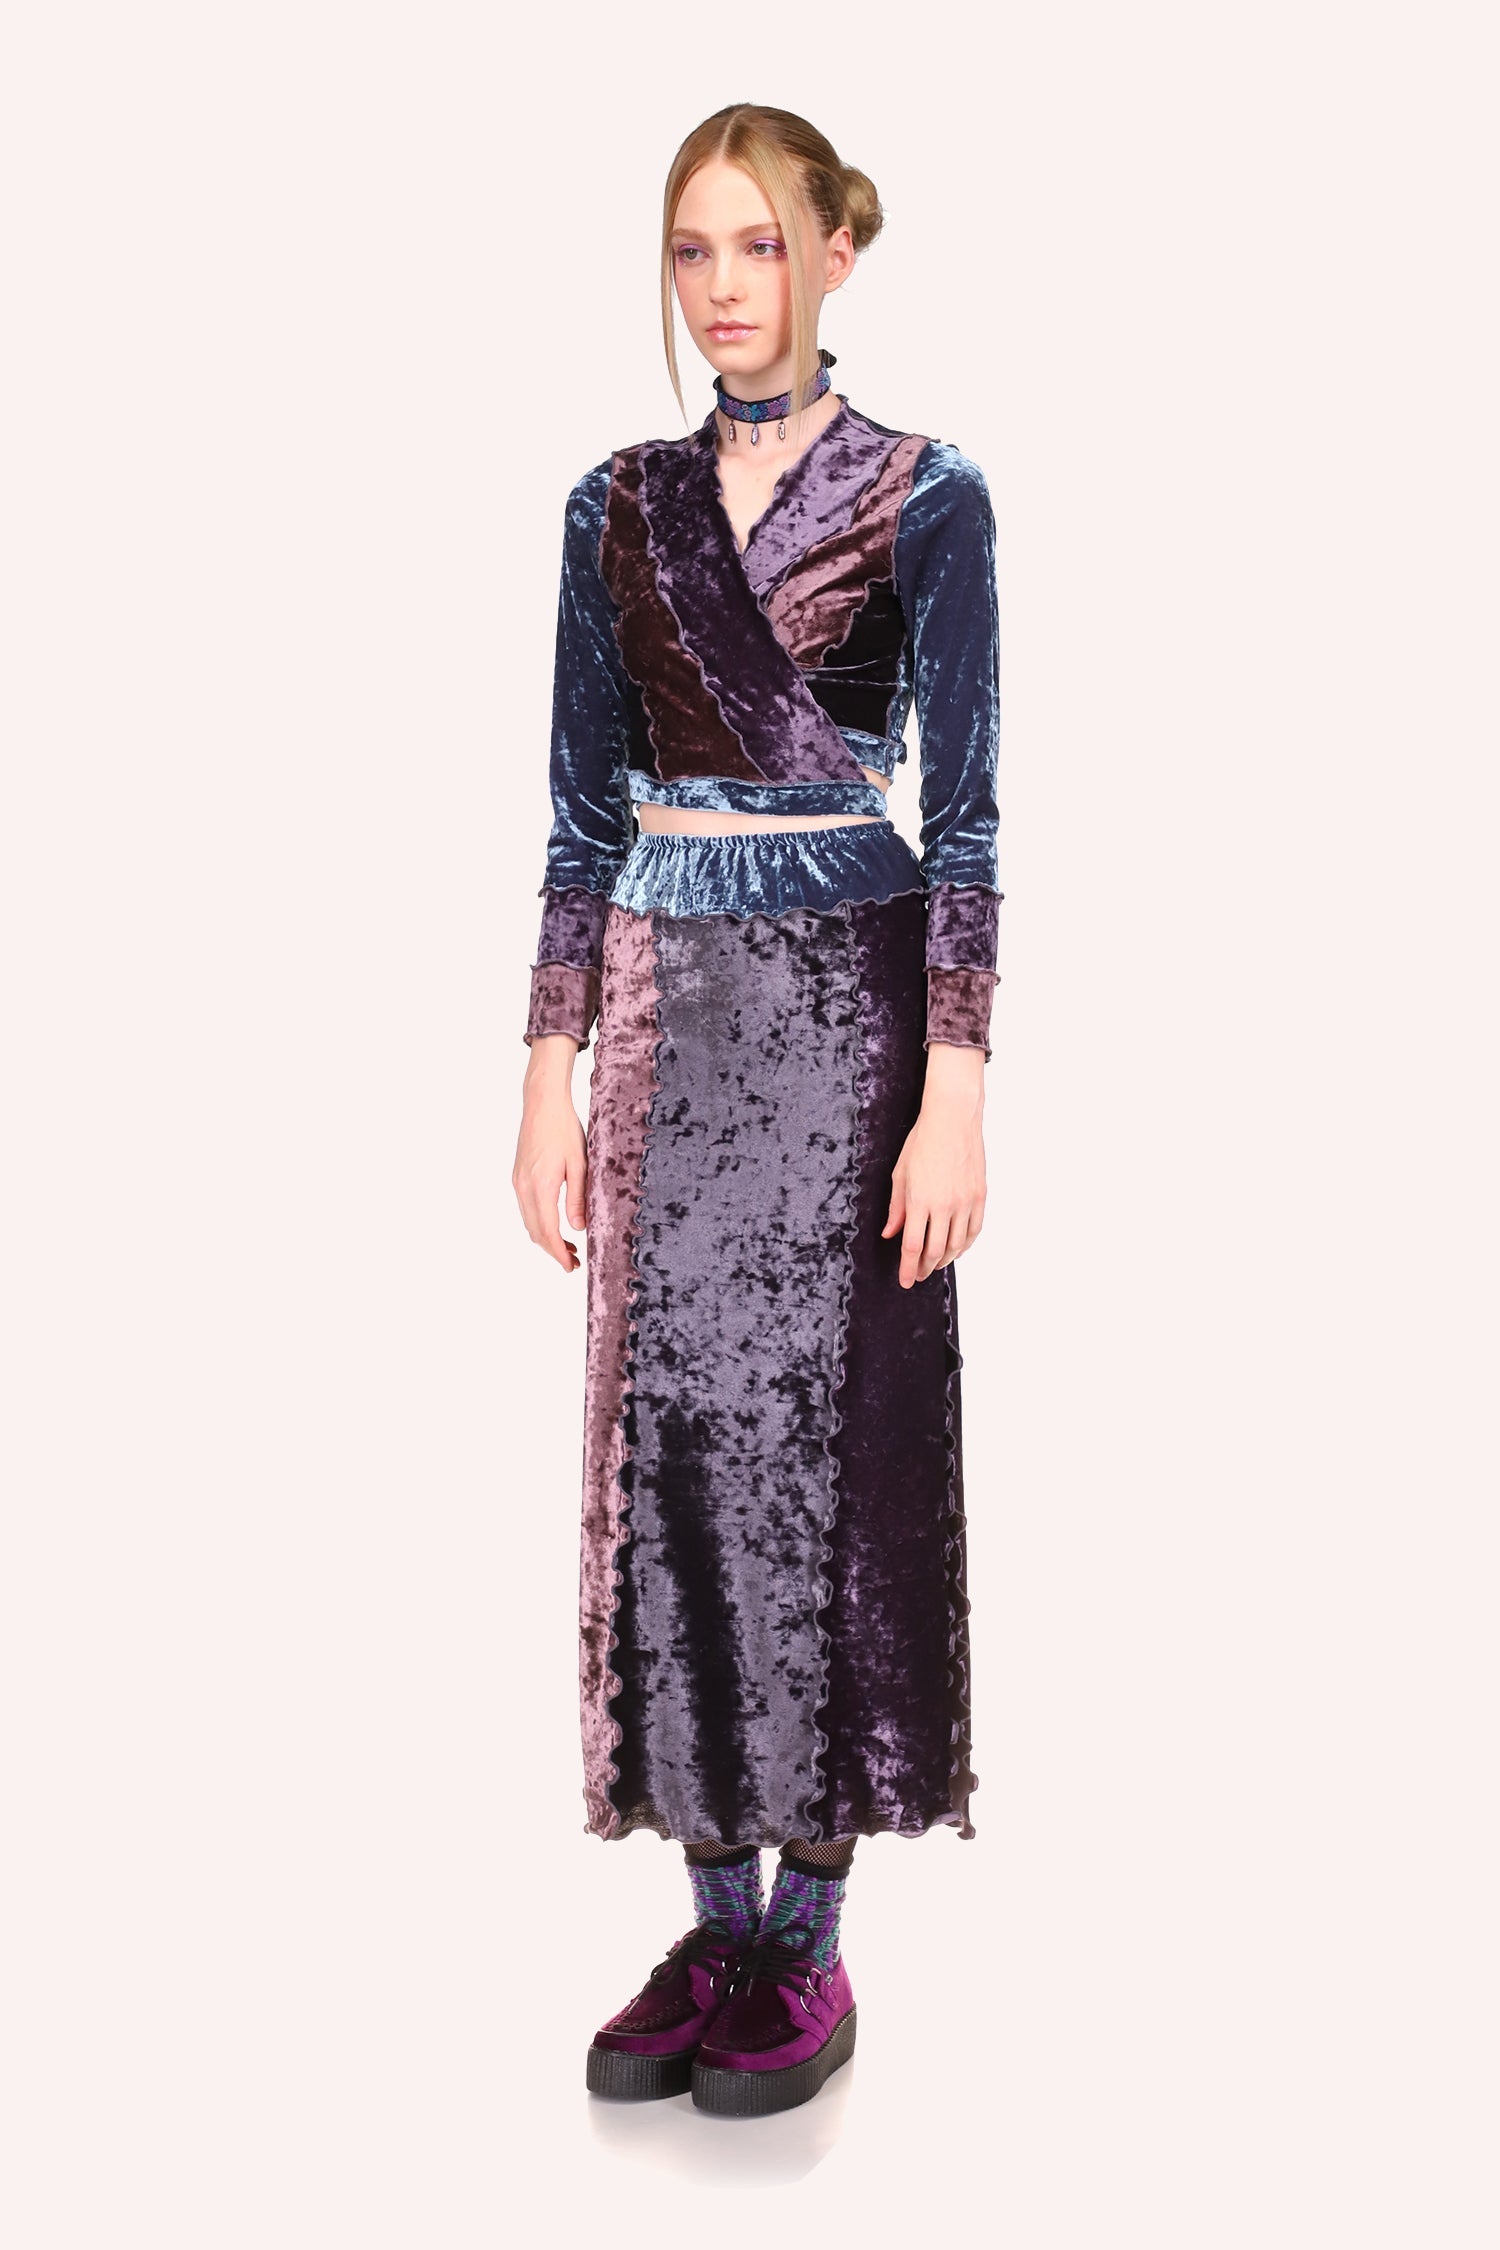 The Color Block Stretch Velvet Skirt in Slate Blue, together with the top, looks warm and comfortable as a whole